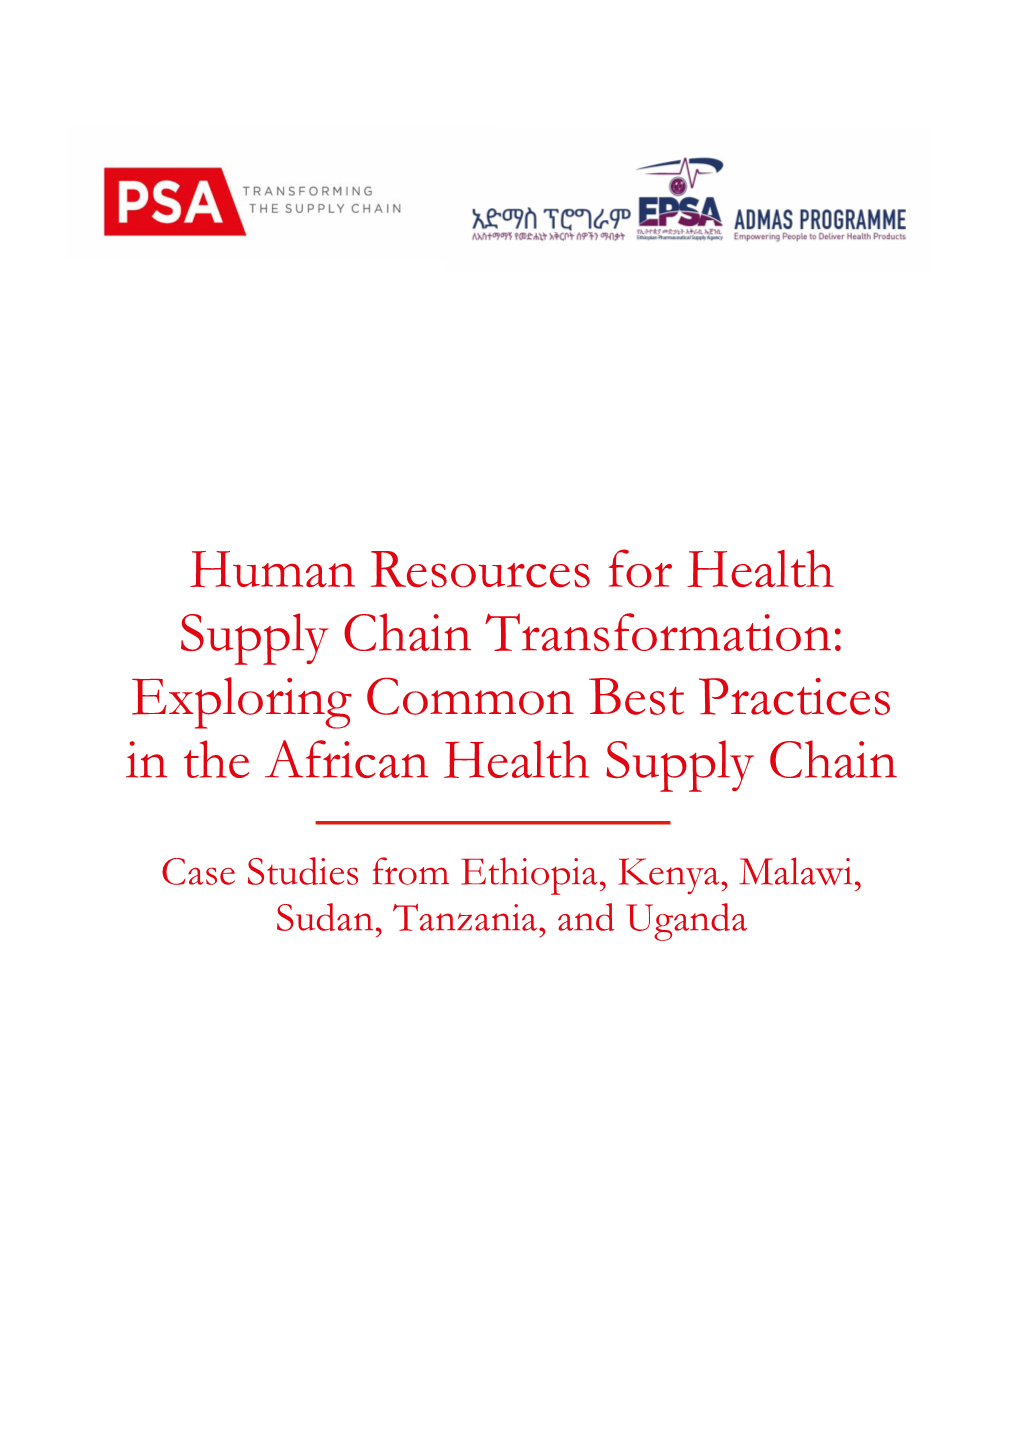 Exploring Common Best Practices in the African Health Supply Chain